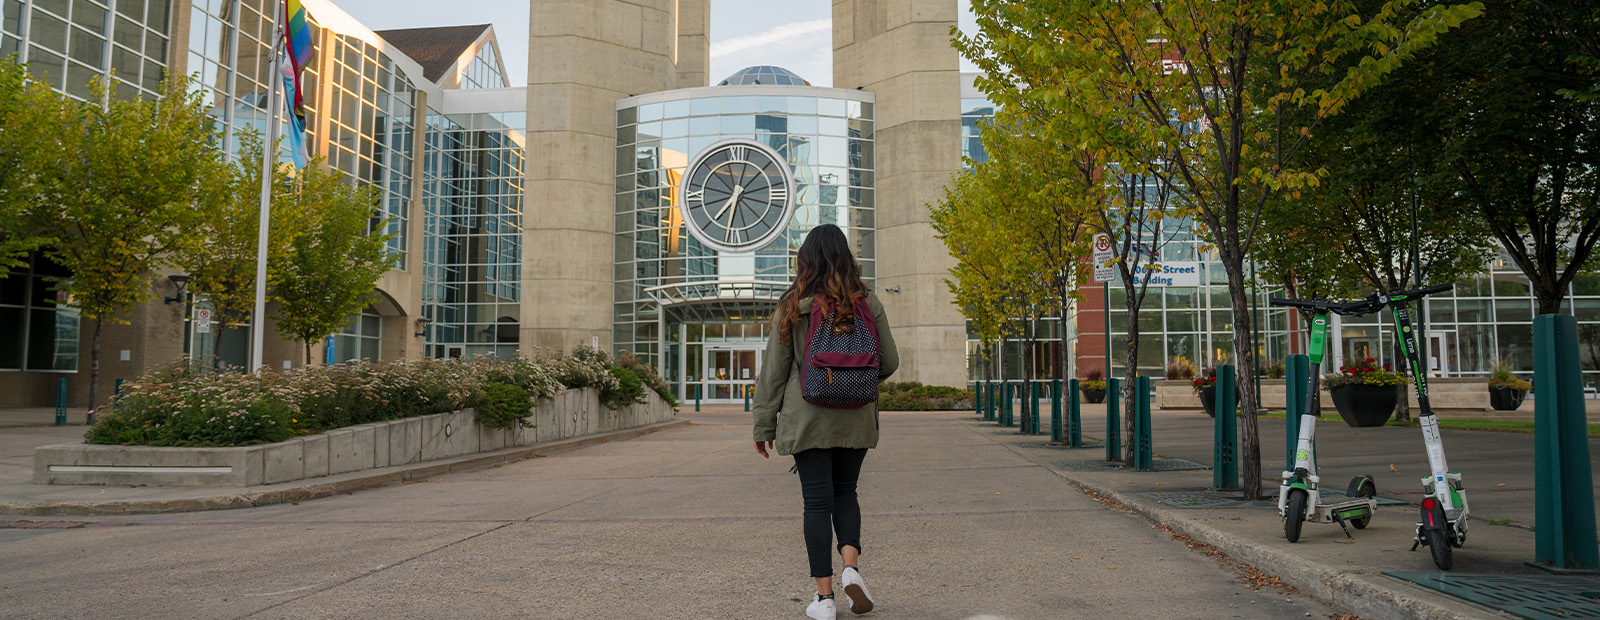 A woman with dark hair, wearing a green jacket and a backpack, is seen from behind as she walks toward the clock tower entrance on MacEwan's campus.